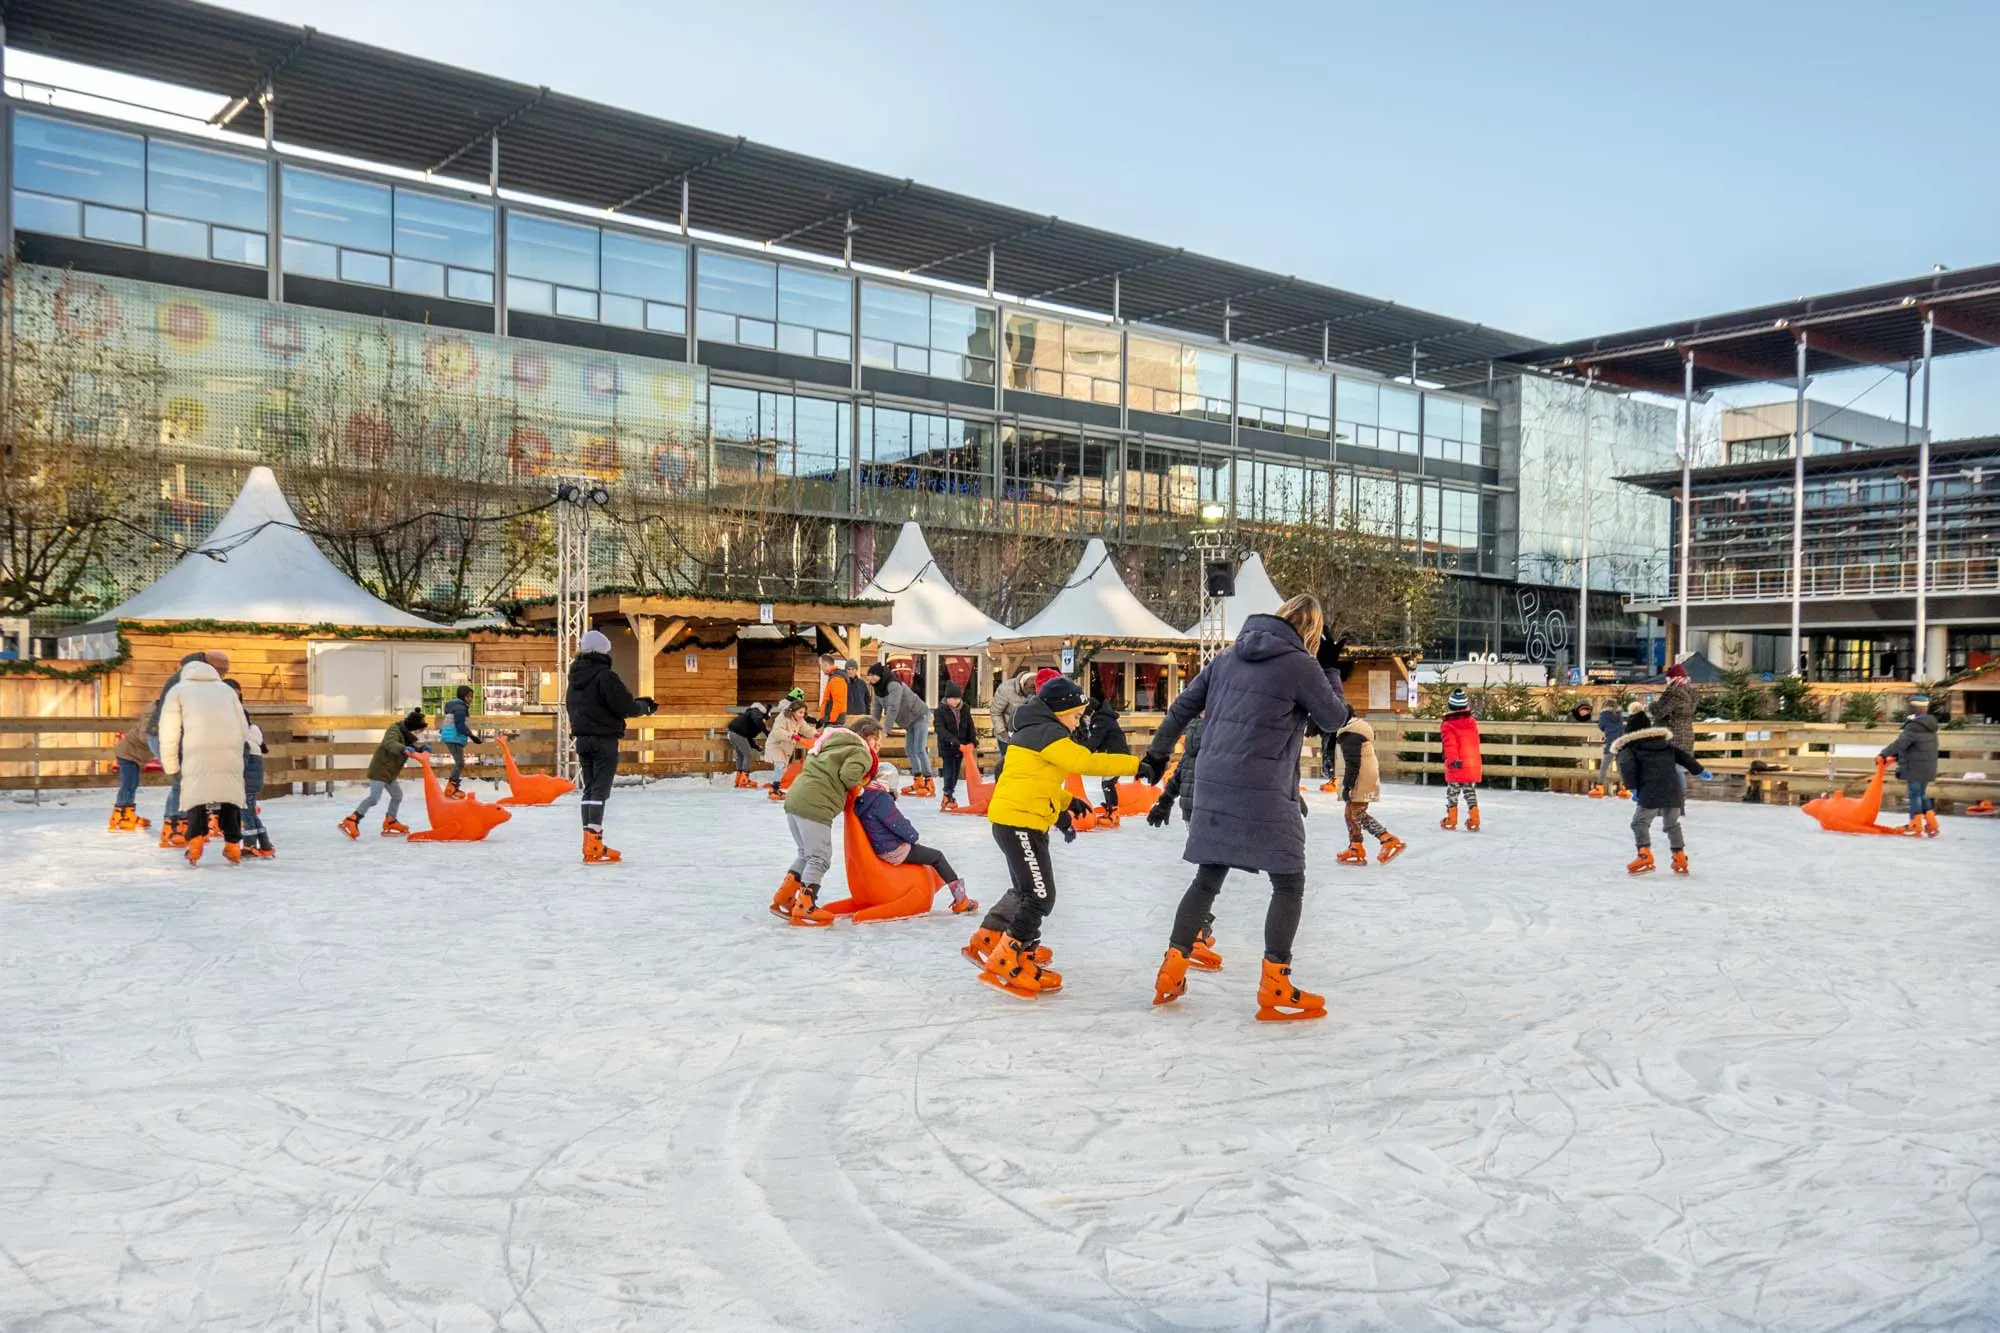 People skating on an ice-skating rink surrounded by market chalets